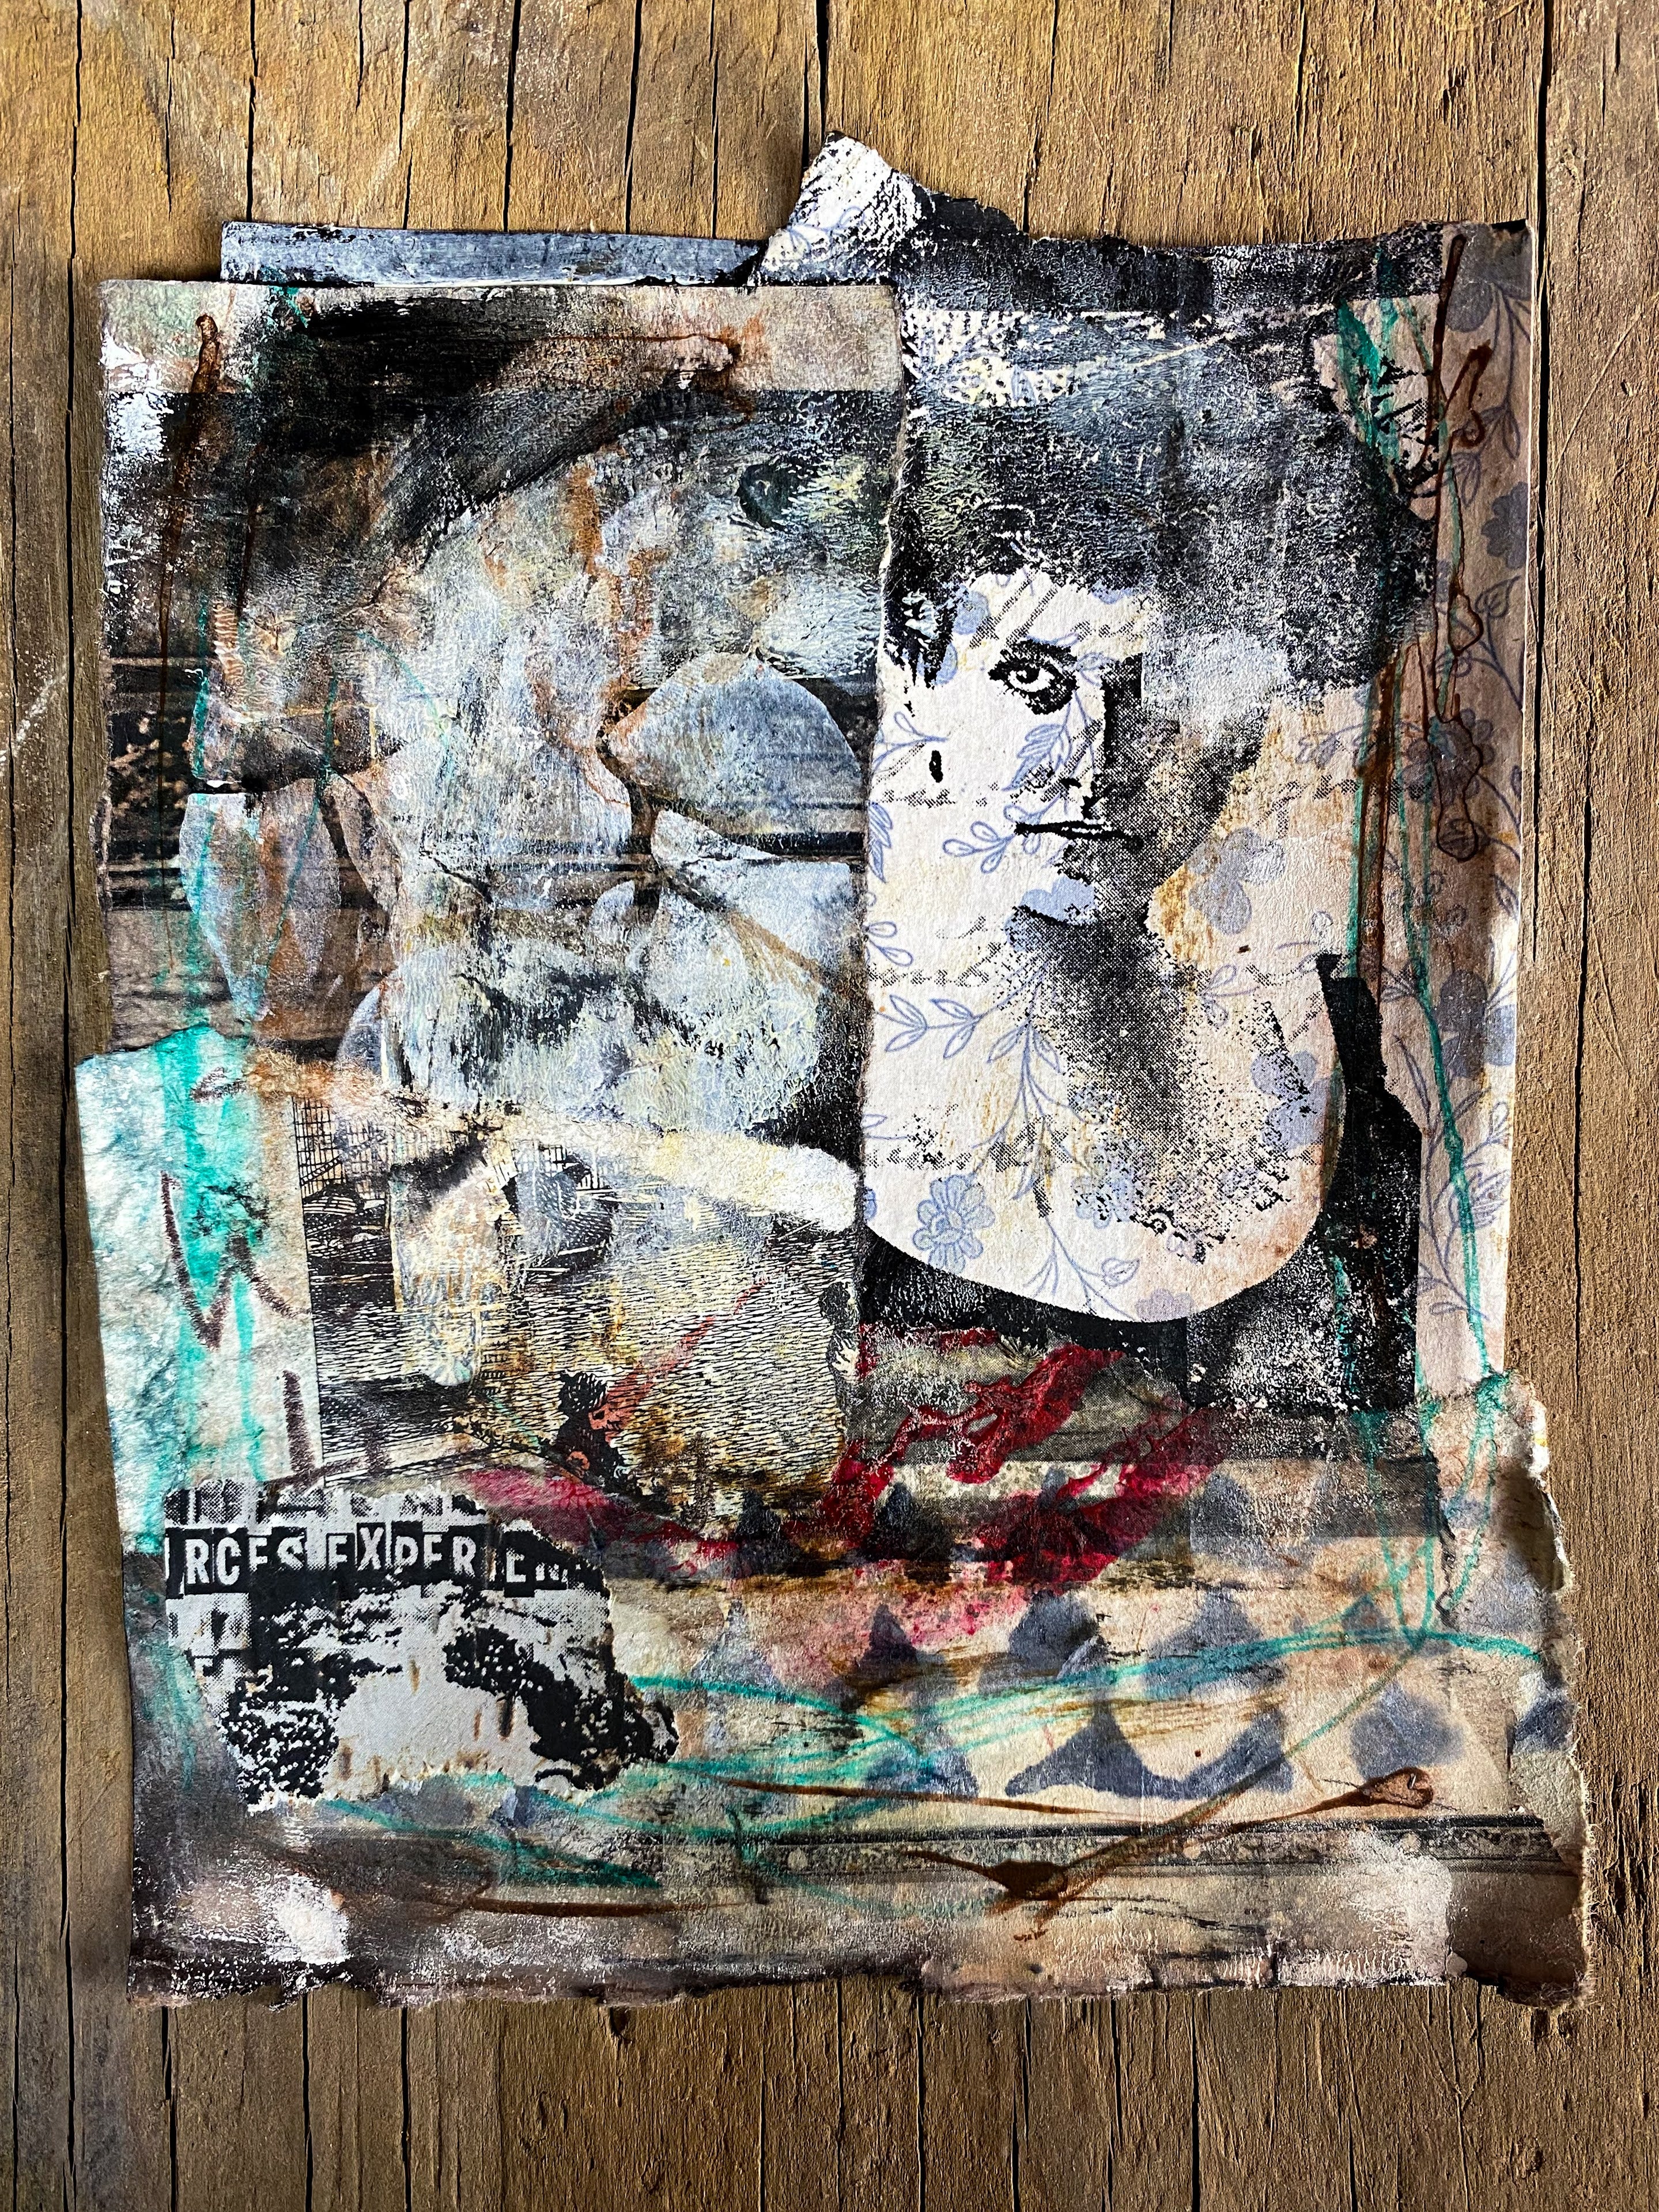 Experience Life - Original Mixed Media Collage